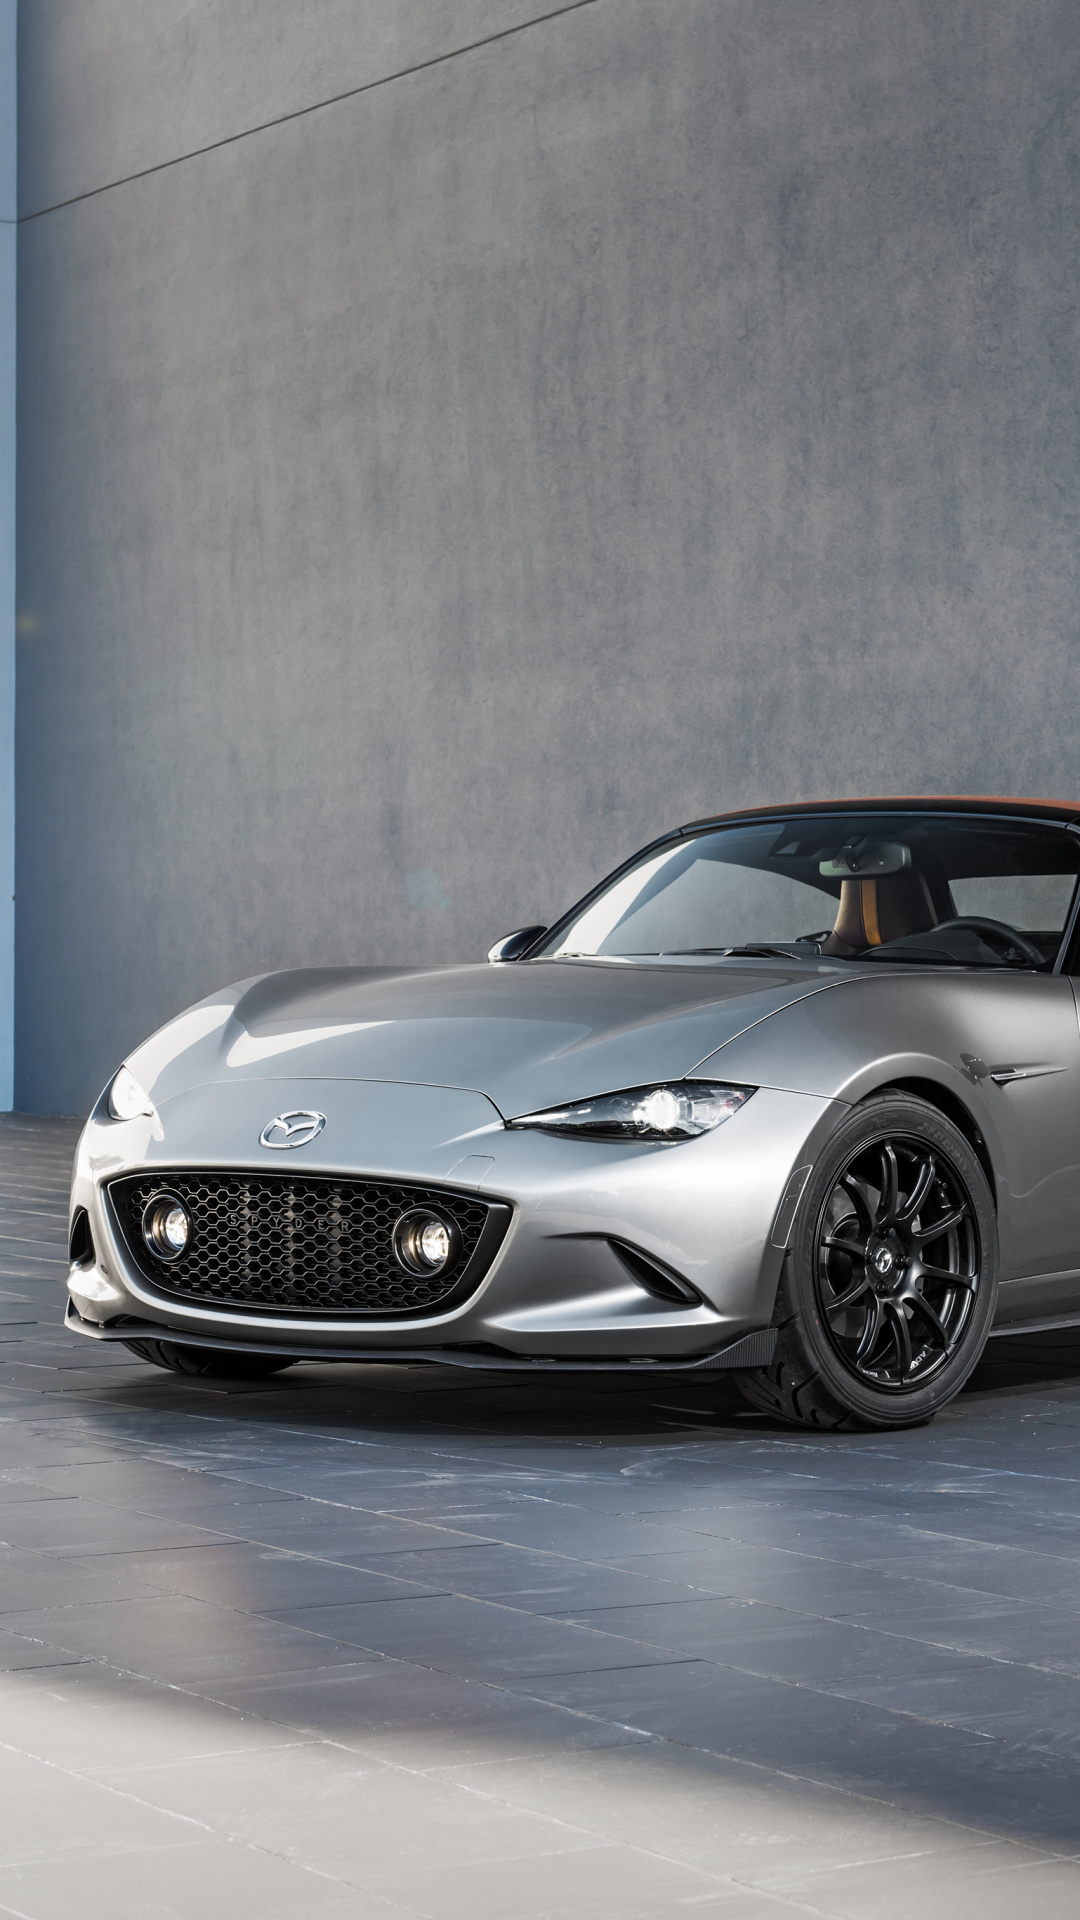 Mazda MX-5, Auto enthusiasts, Convertible freedom, Sports car experience, 1080x1920 Full HD Phone